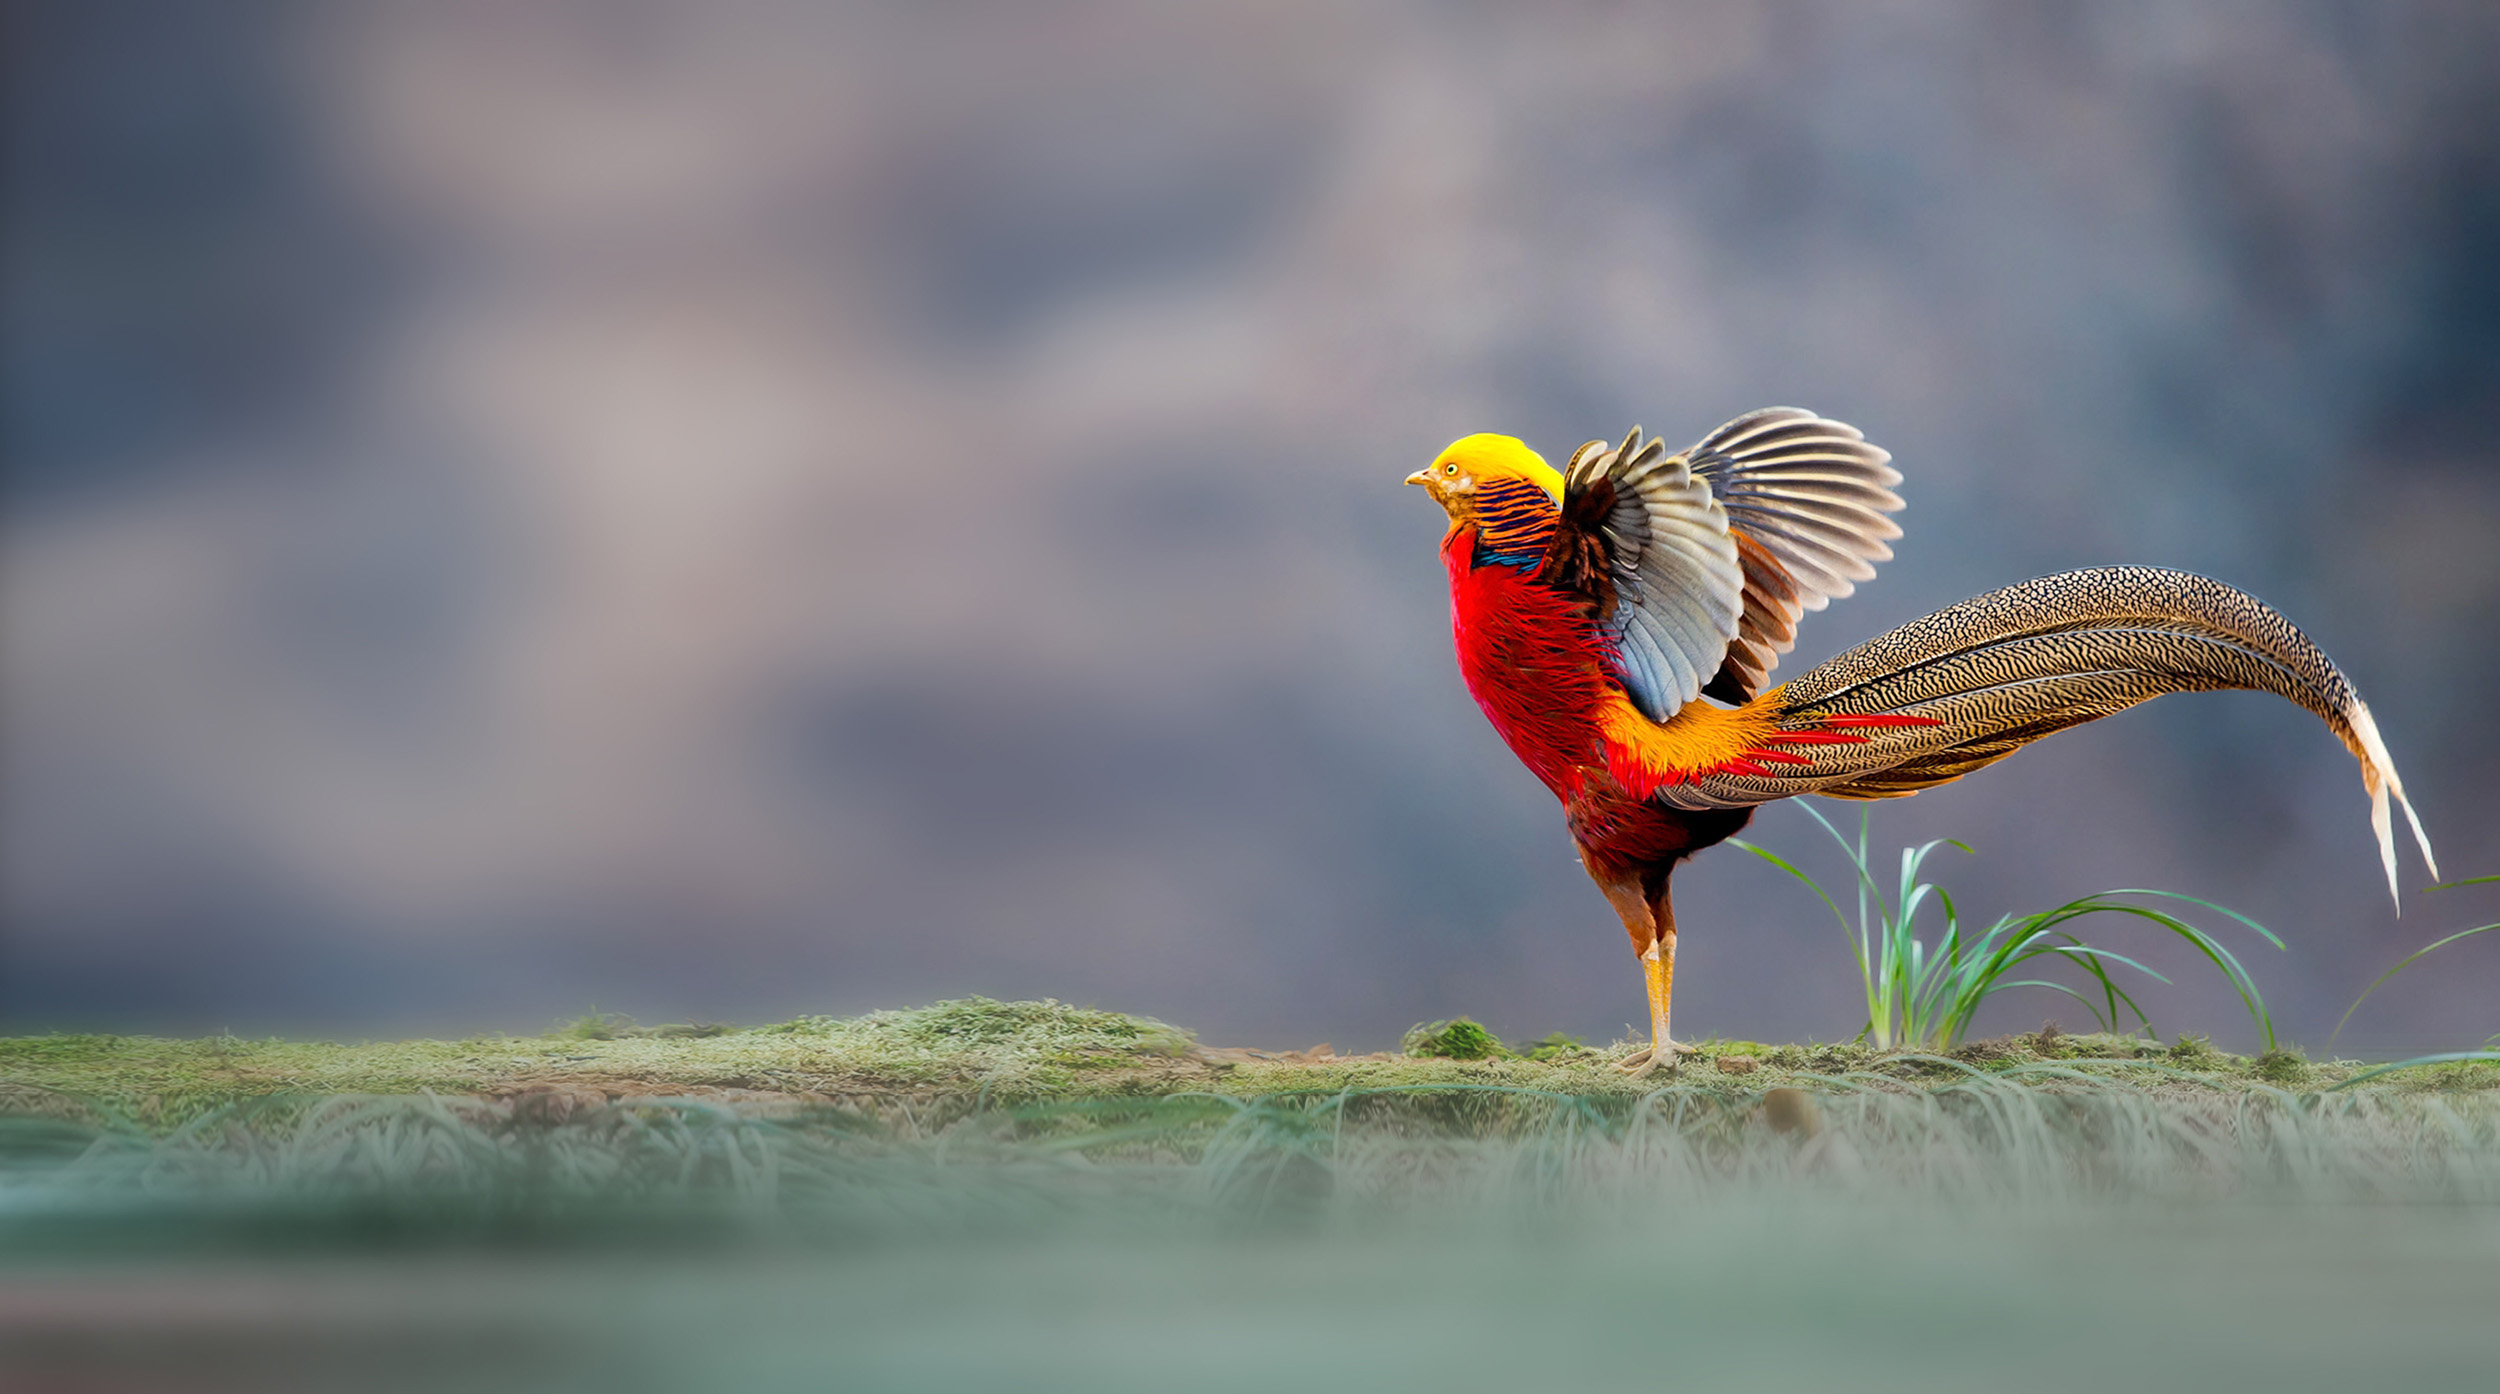 A male Golden Pheasant stood in a field flapping his wings.